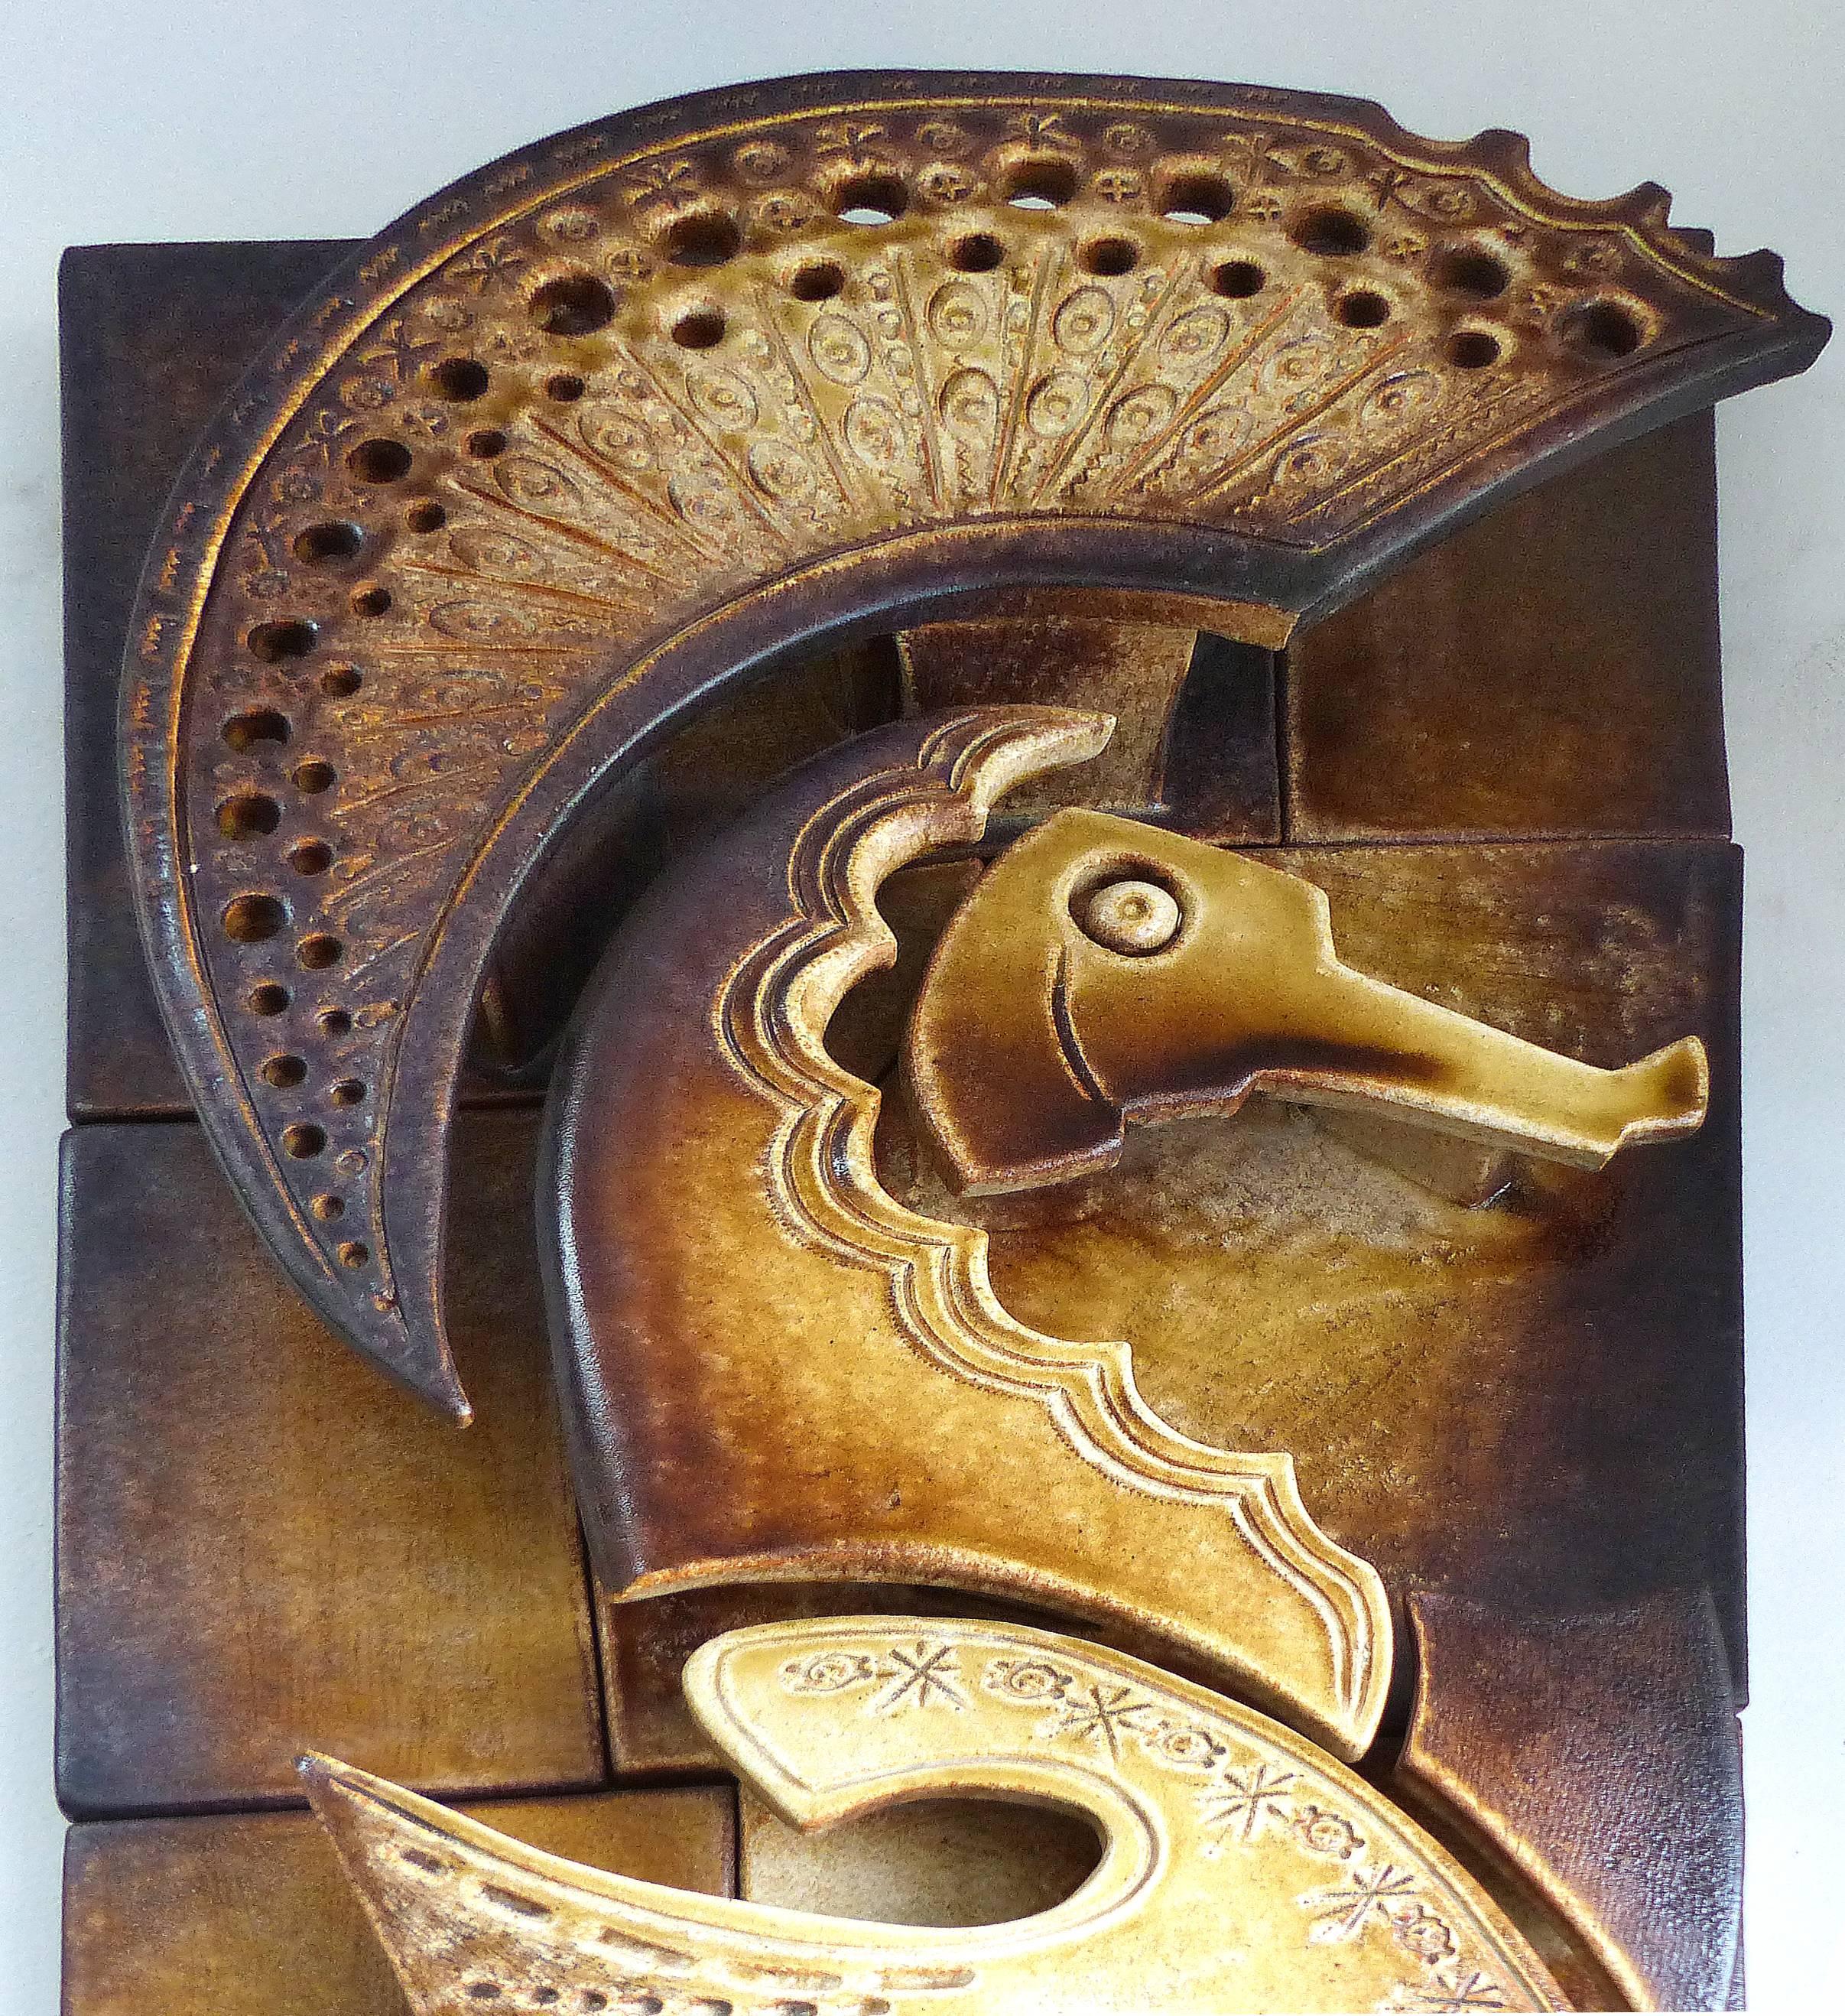 1977 Vintage Glazed Ceramic Clay Seahorse Wall Sculpture

A striking 1977 hand-built clay seahorse wall sculpture created with great depth. Illegibly signed lower left. The work comprises several panels mounted on board. 

  
 